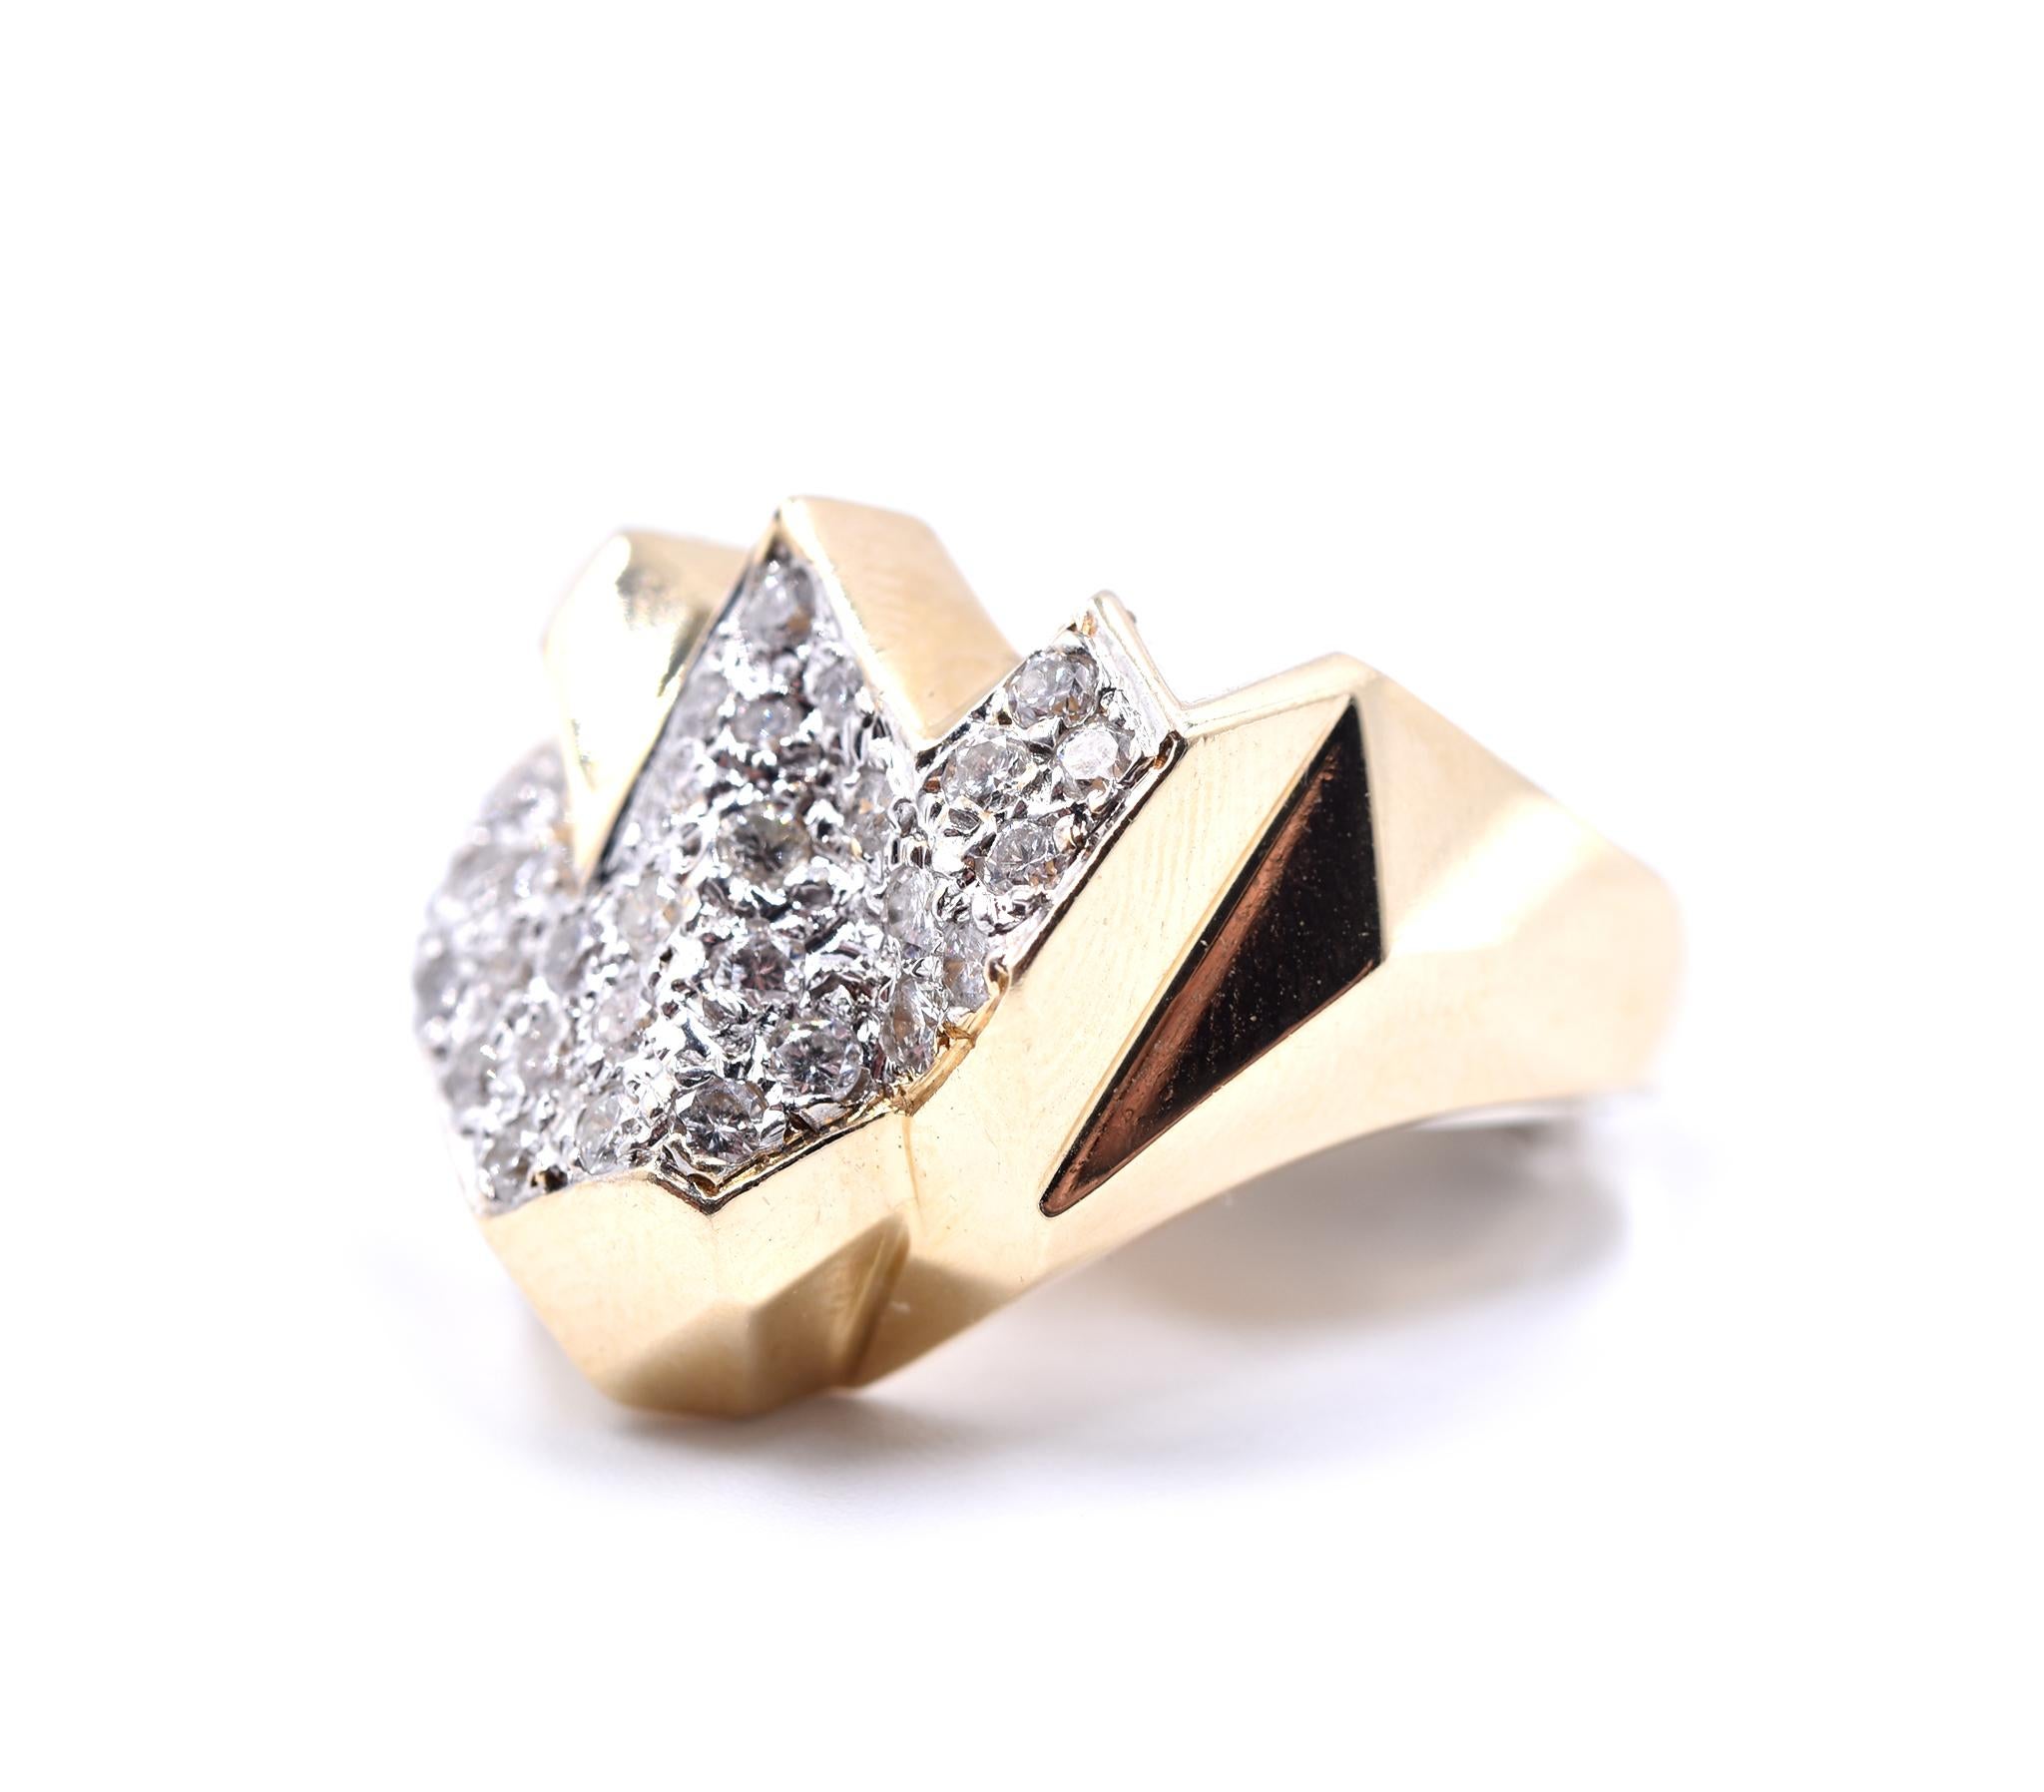 14 Karat Yellow Gold Diamond Fashion Ring In Excellent Condition For Sale In Scottsdale, AZ